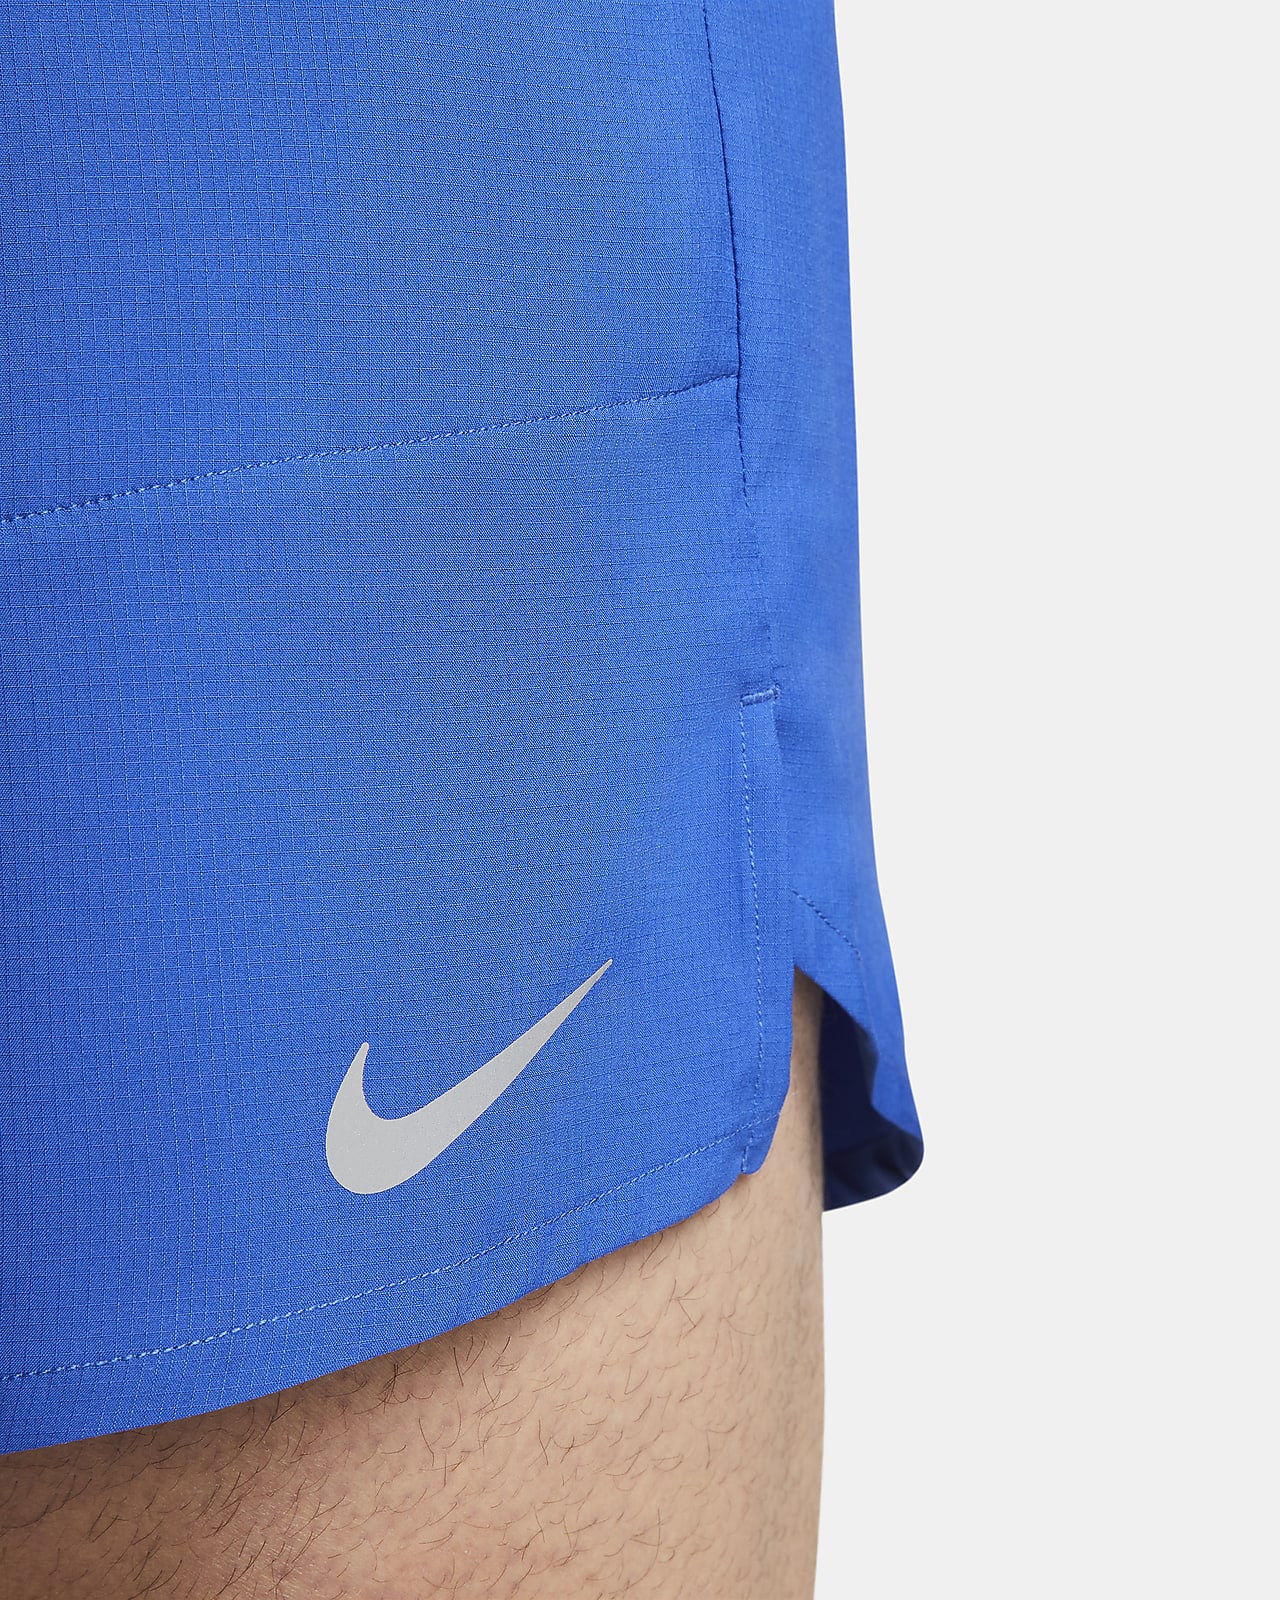 Nike Stride Men's Dri-FIT 13cm (approx.) Brief-Lined Running Shorts. Nike DK